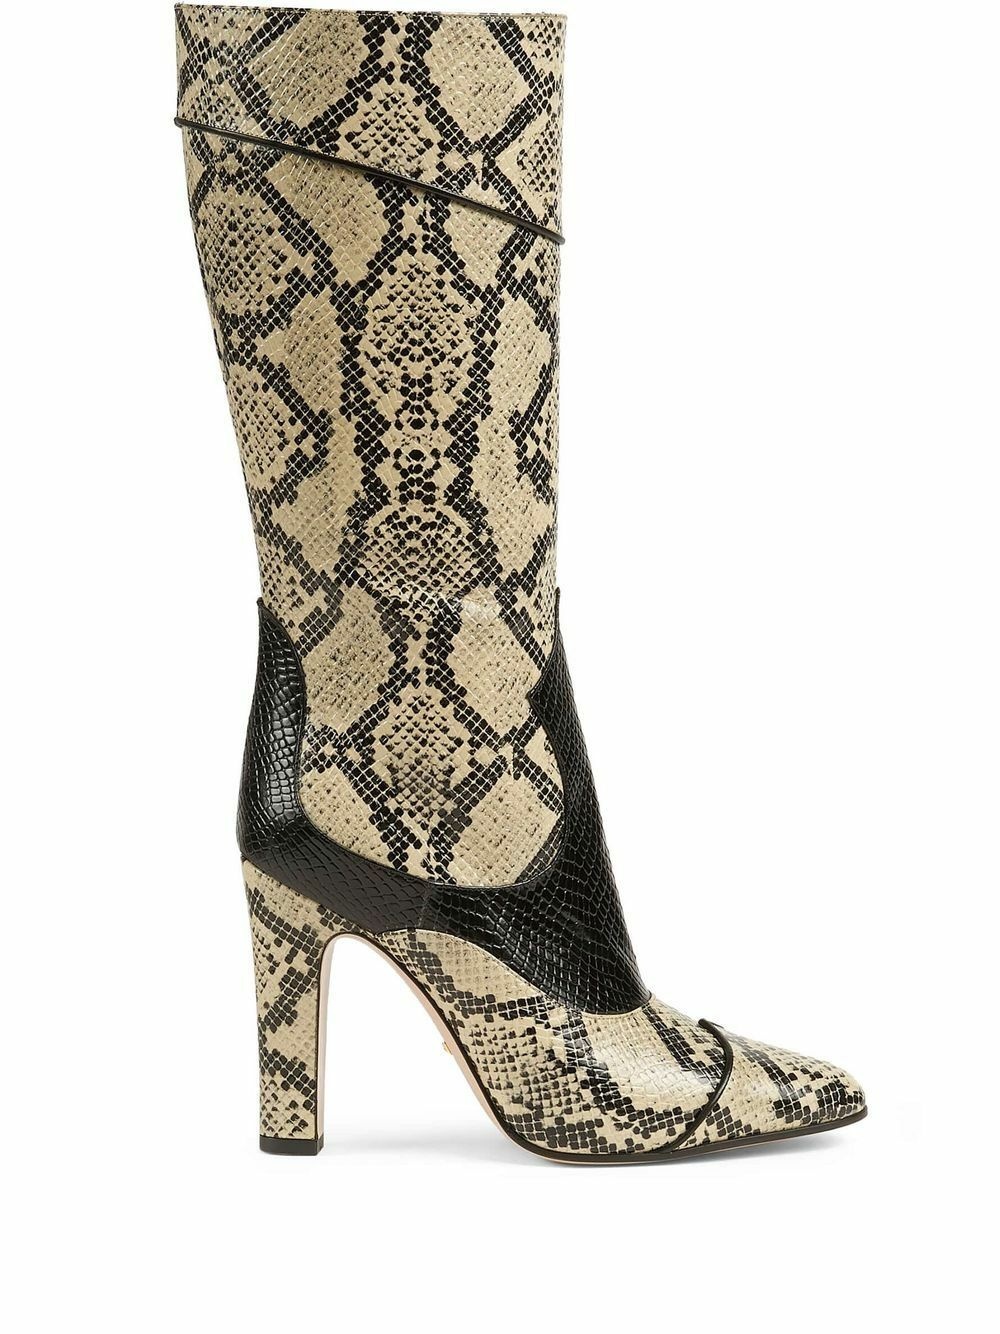 GUCCI - Snake Print Leather Boots Gucci